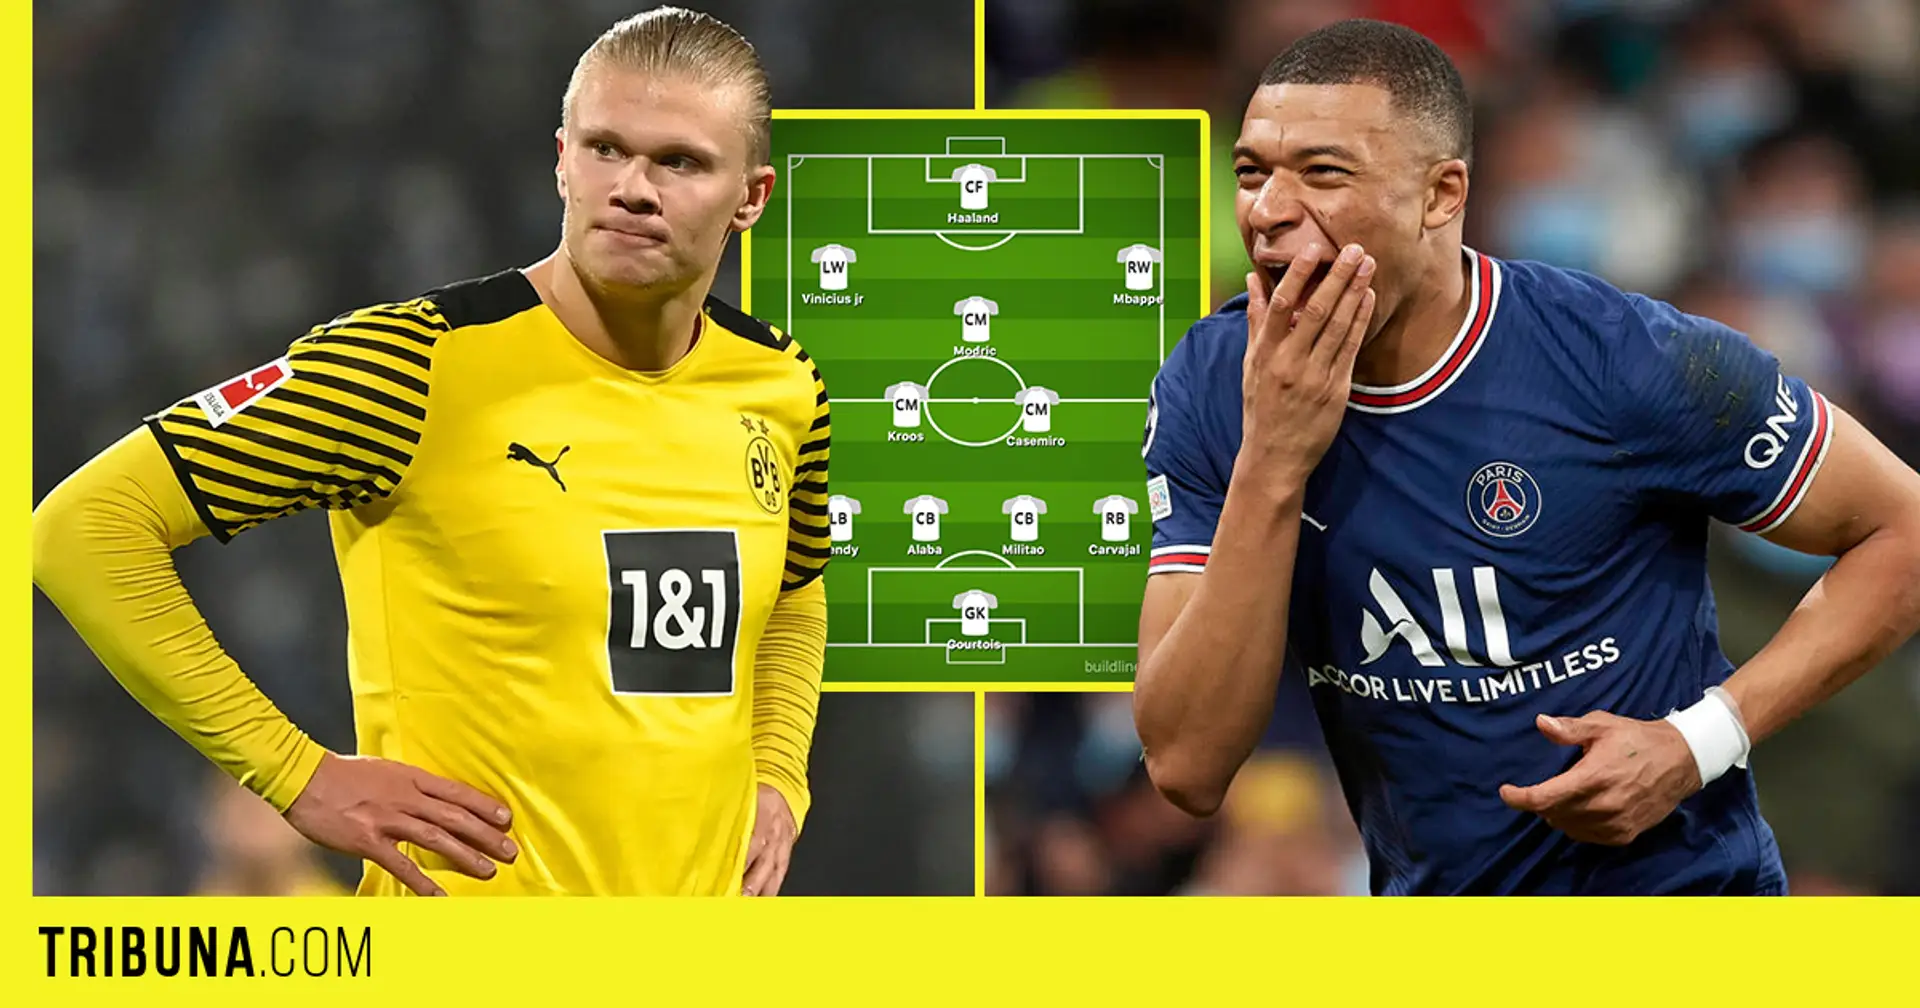 Mbappe, Haaland and more: How Real Madrid's starting line-up could look next season